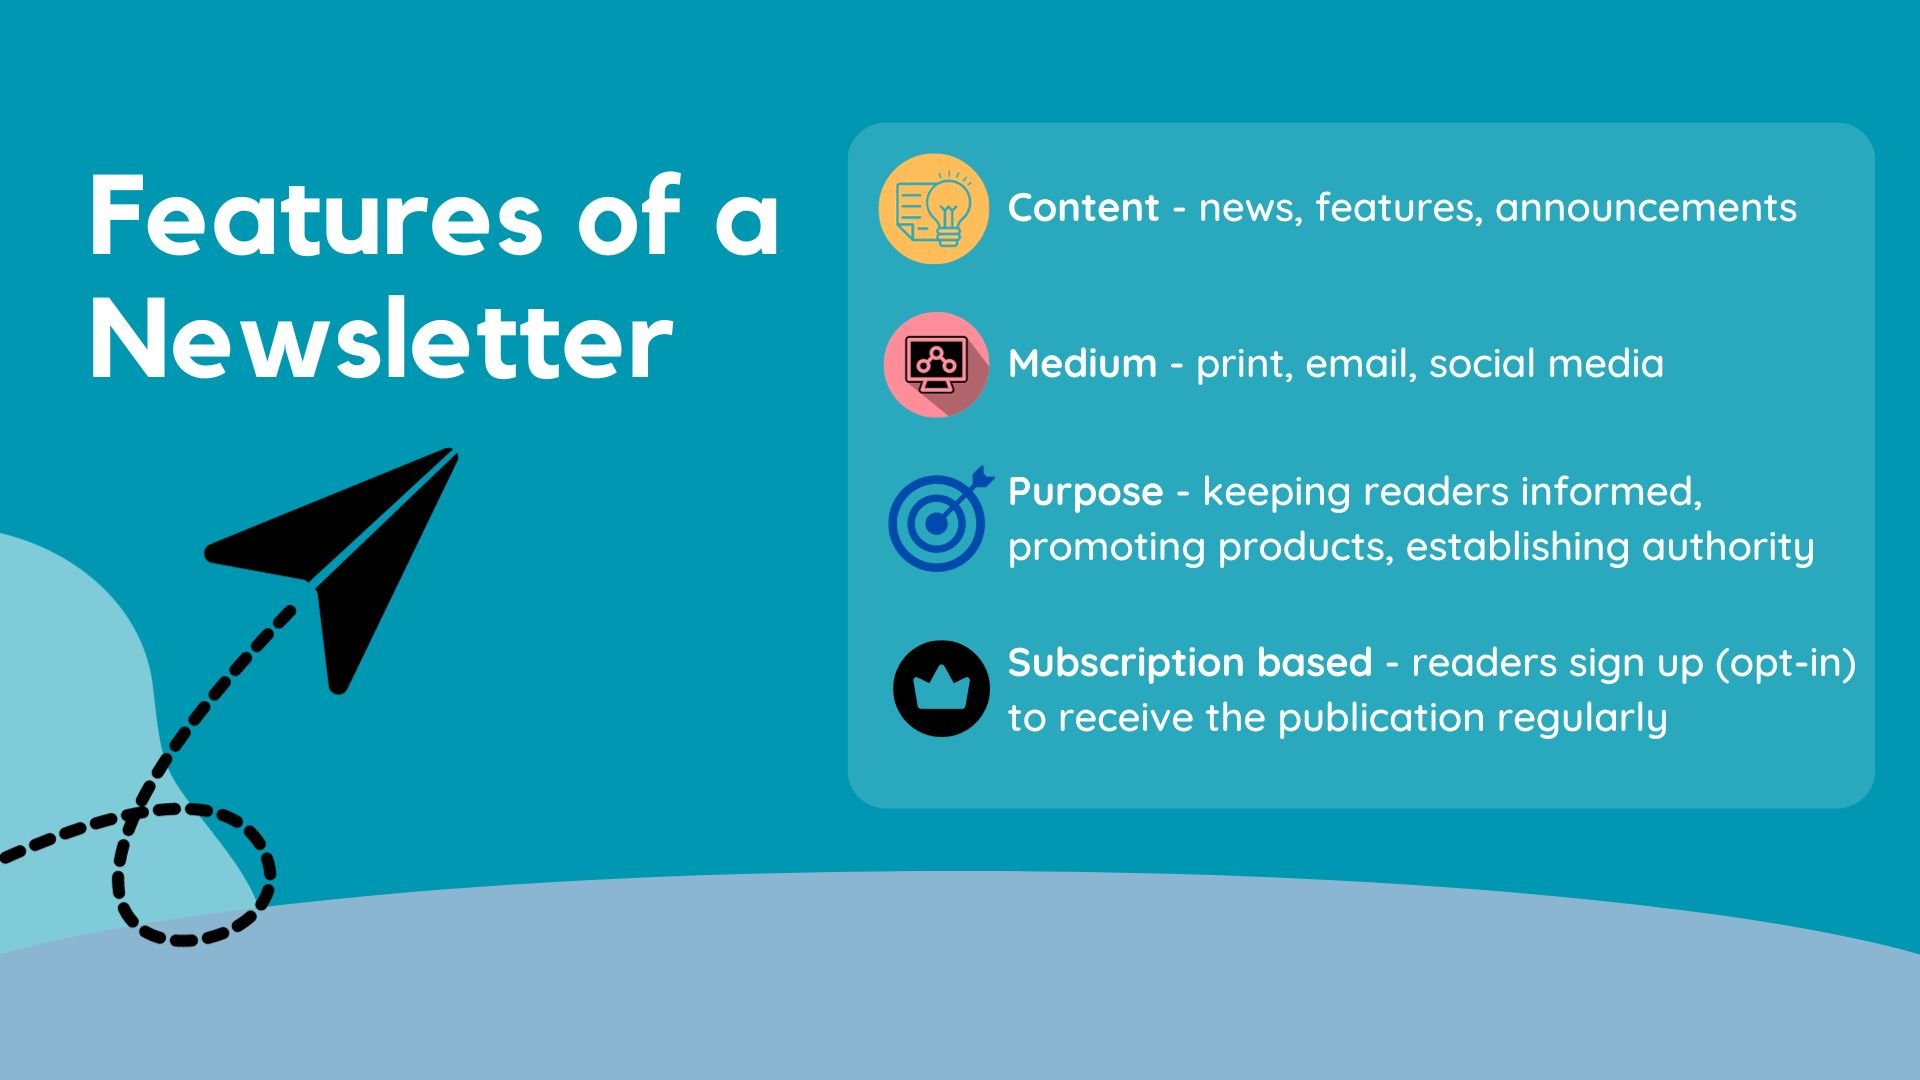 Image showing the key features of a newsletter